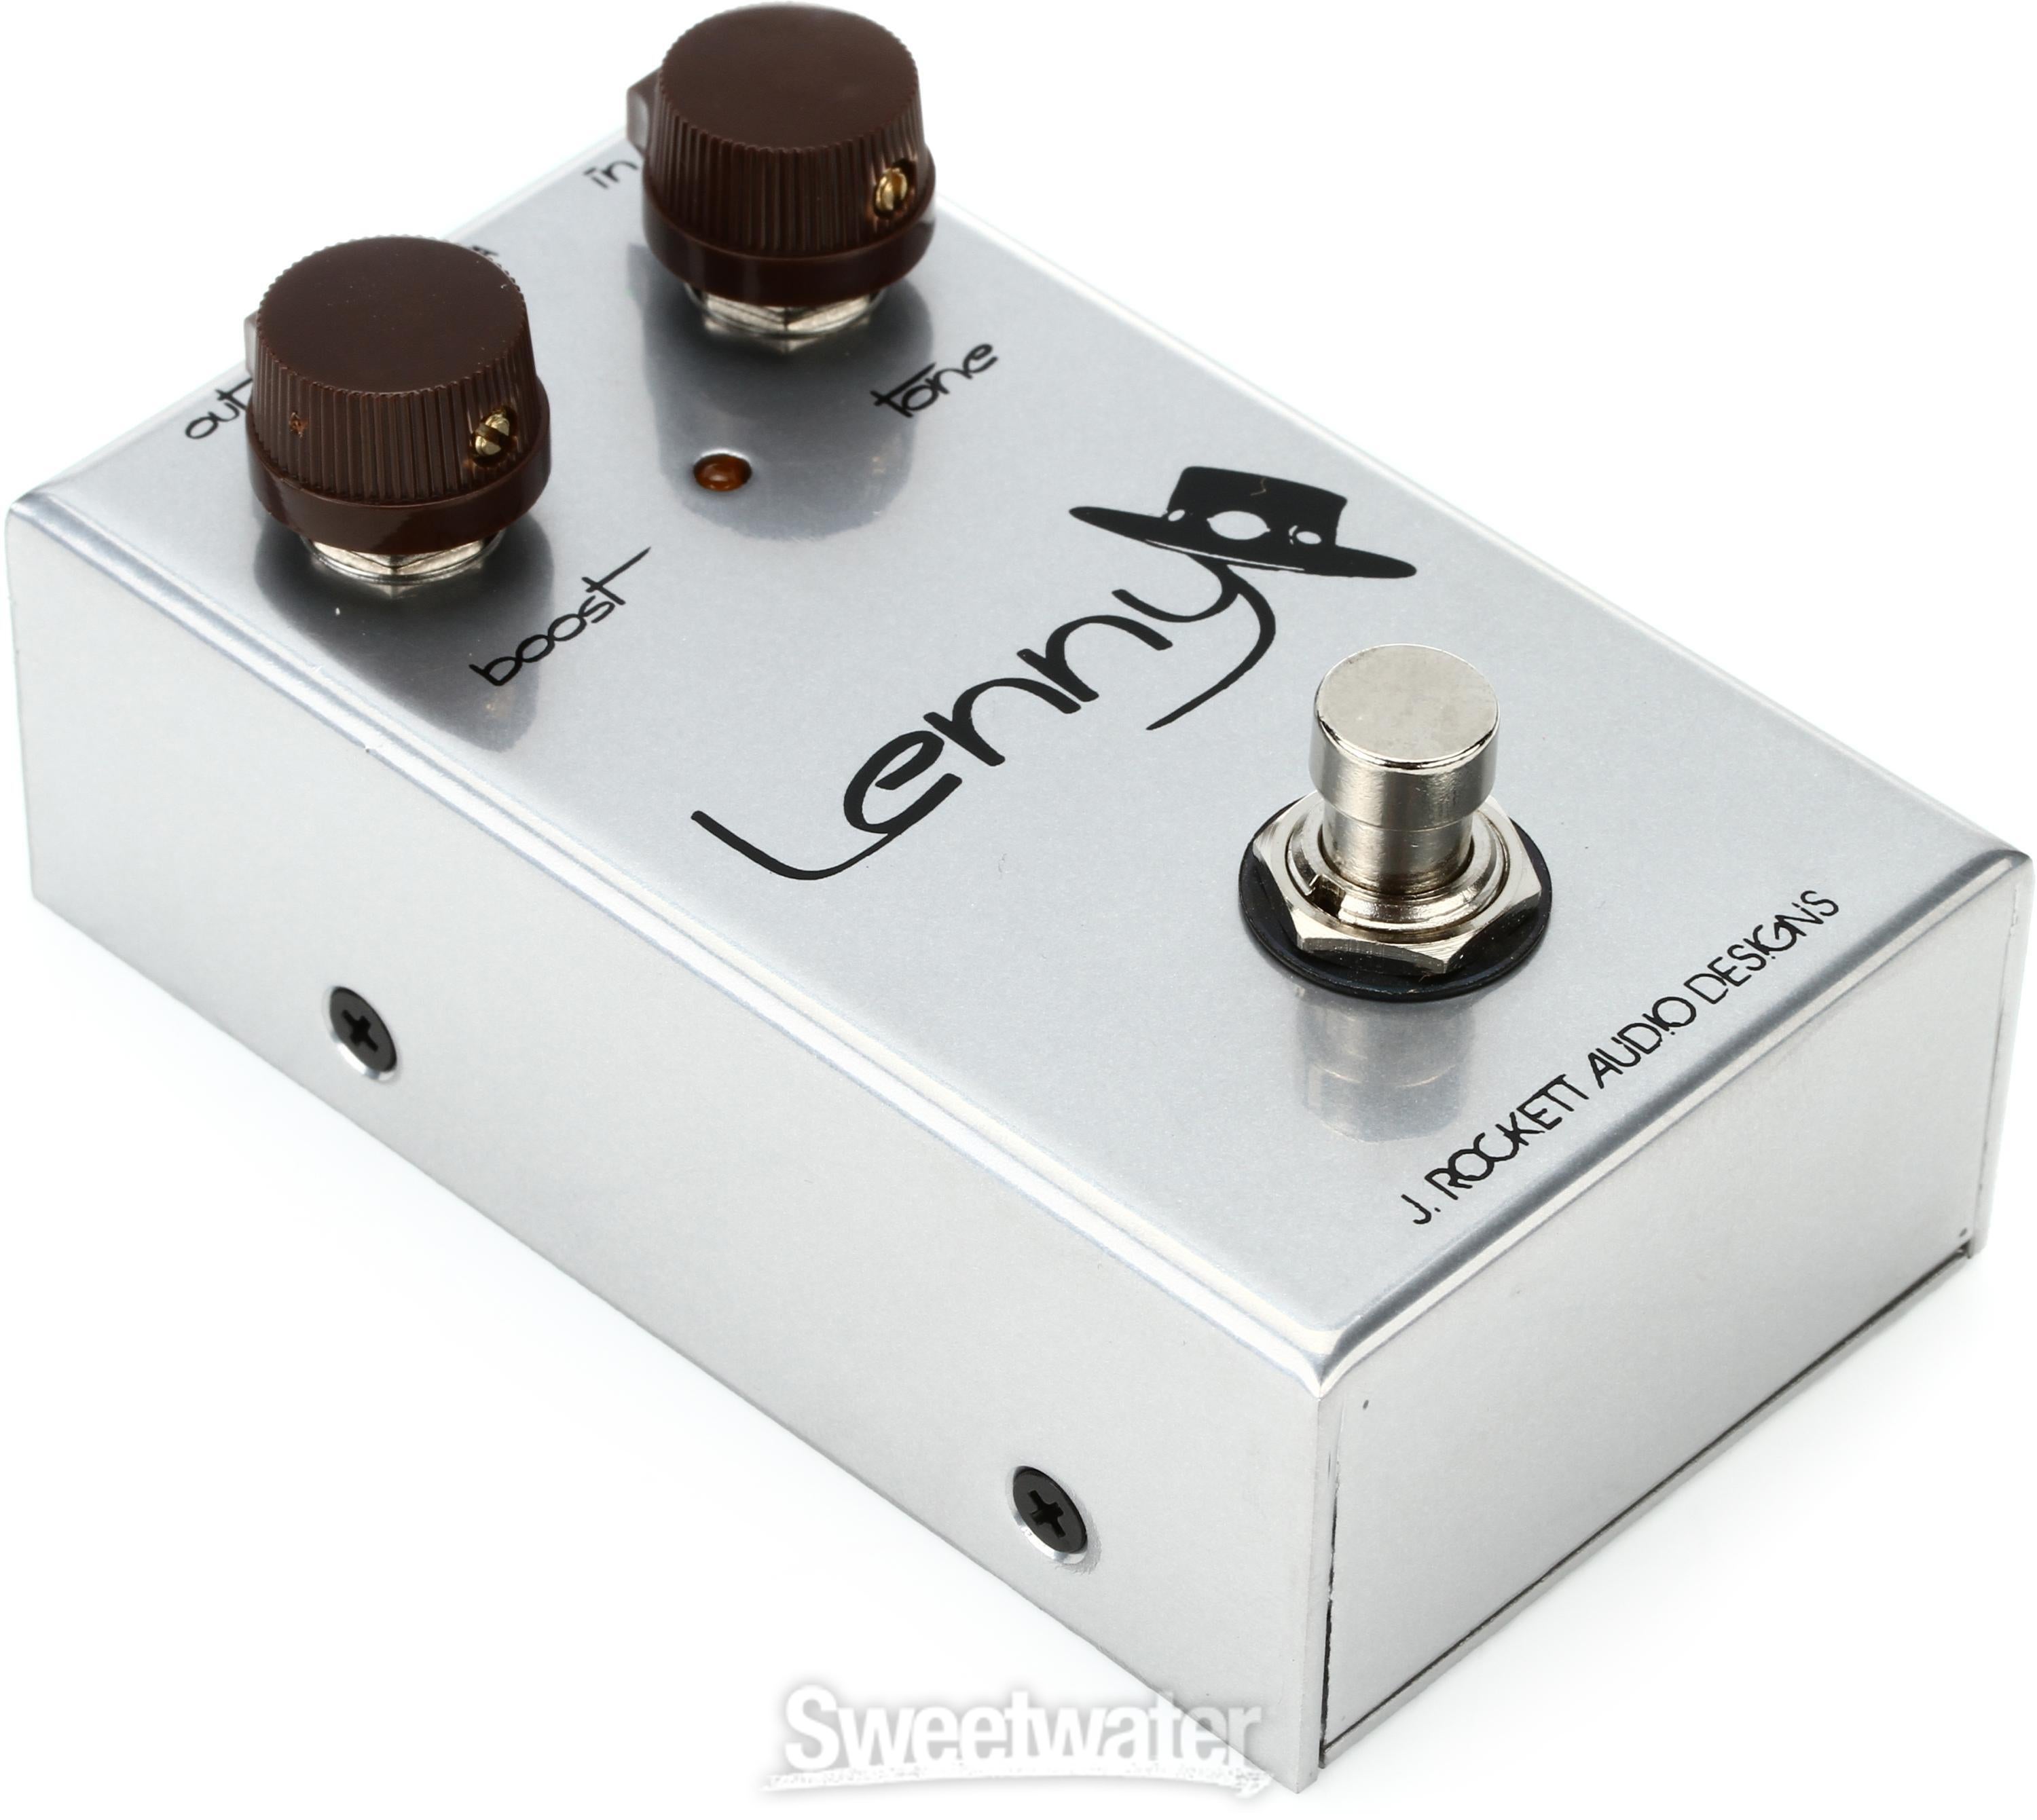 J. Rockett Audio Designs Lenny Boost/Overdrive Pedal | Sweetwater